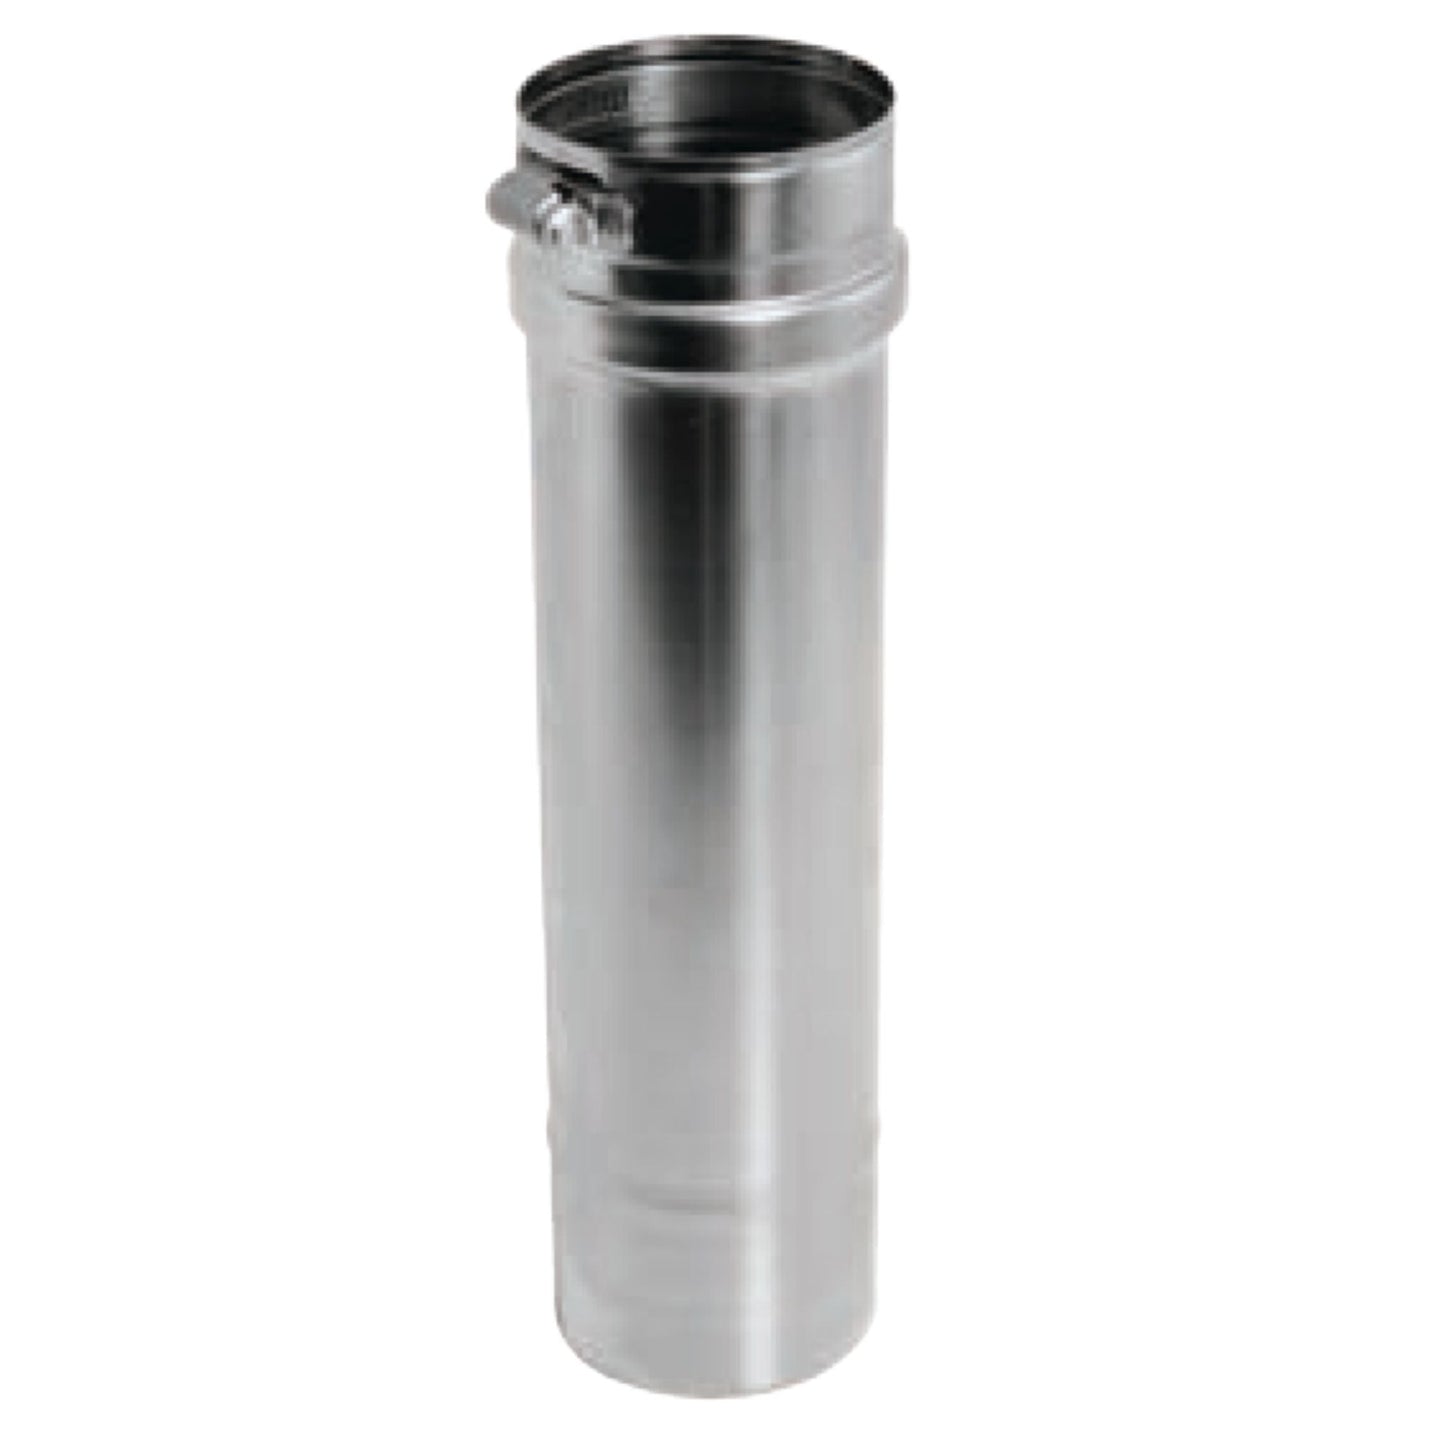 DuraVent FasNSeal 16" x 12" 29-4C Stainless Steel Vent Length